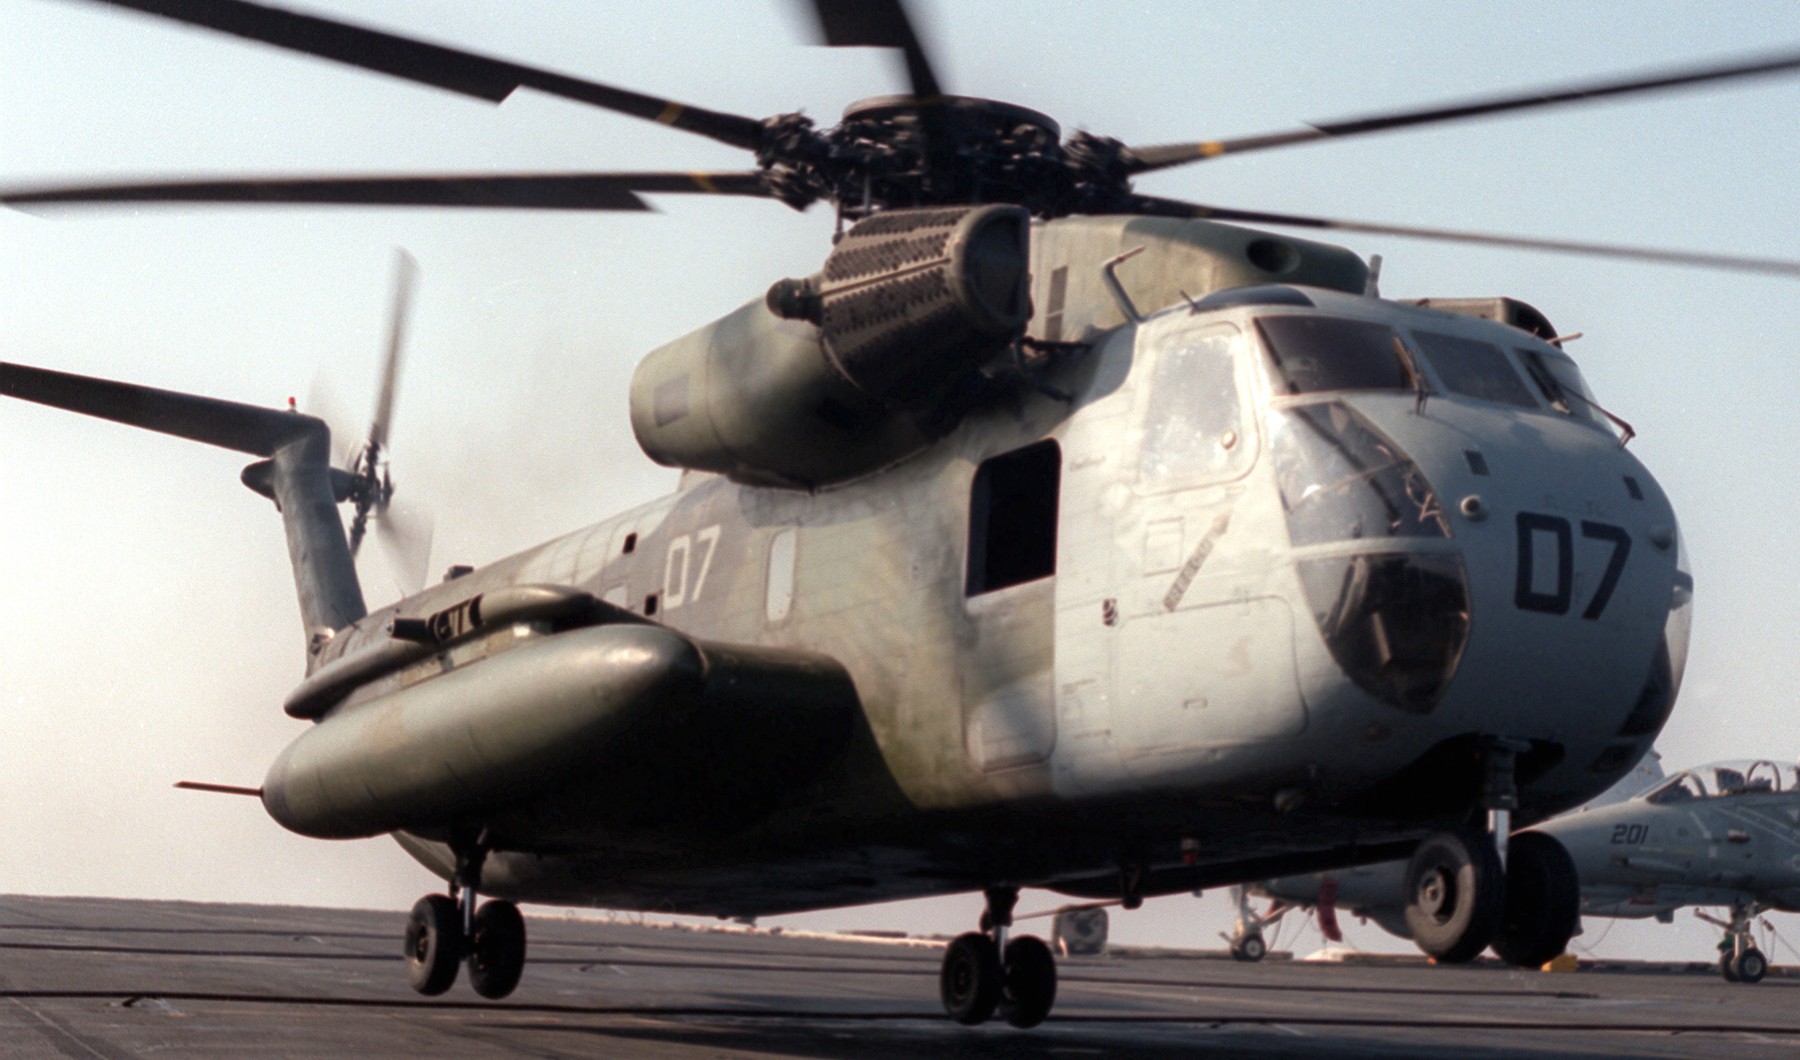 hmh-362 ugly angels marine heavy helicopter squadron usmc sikorsky ch-53d sea stallion 21